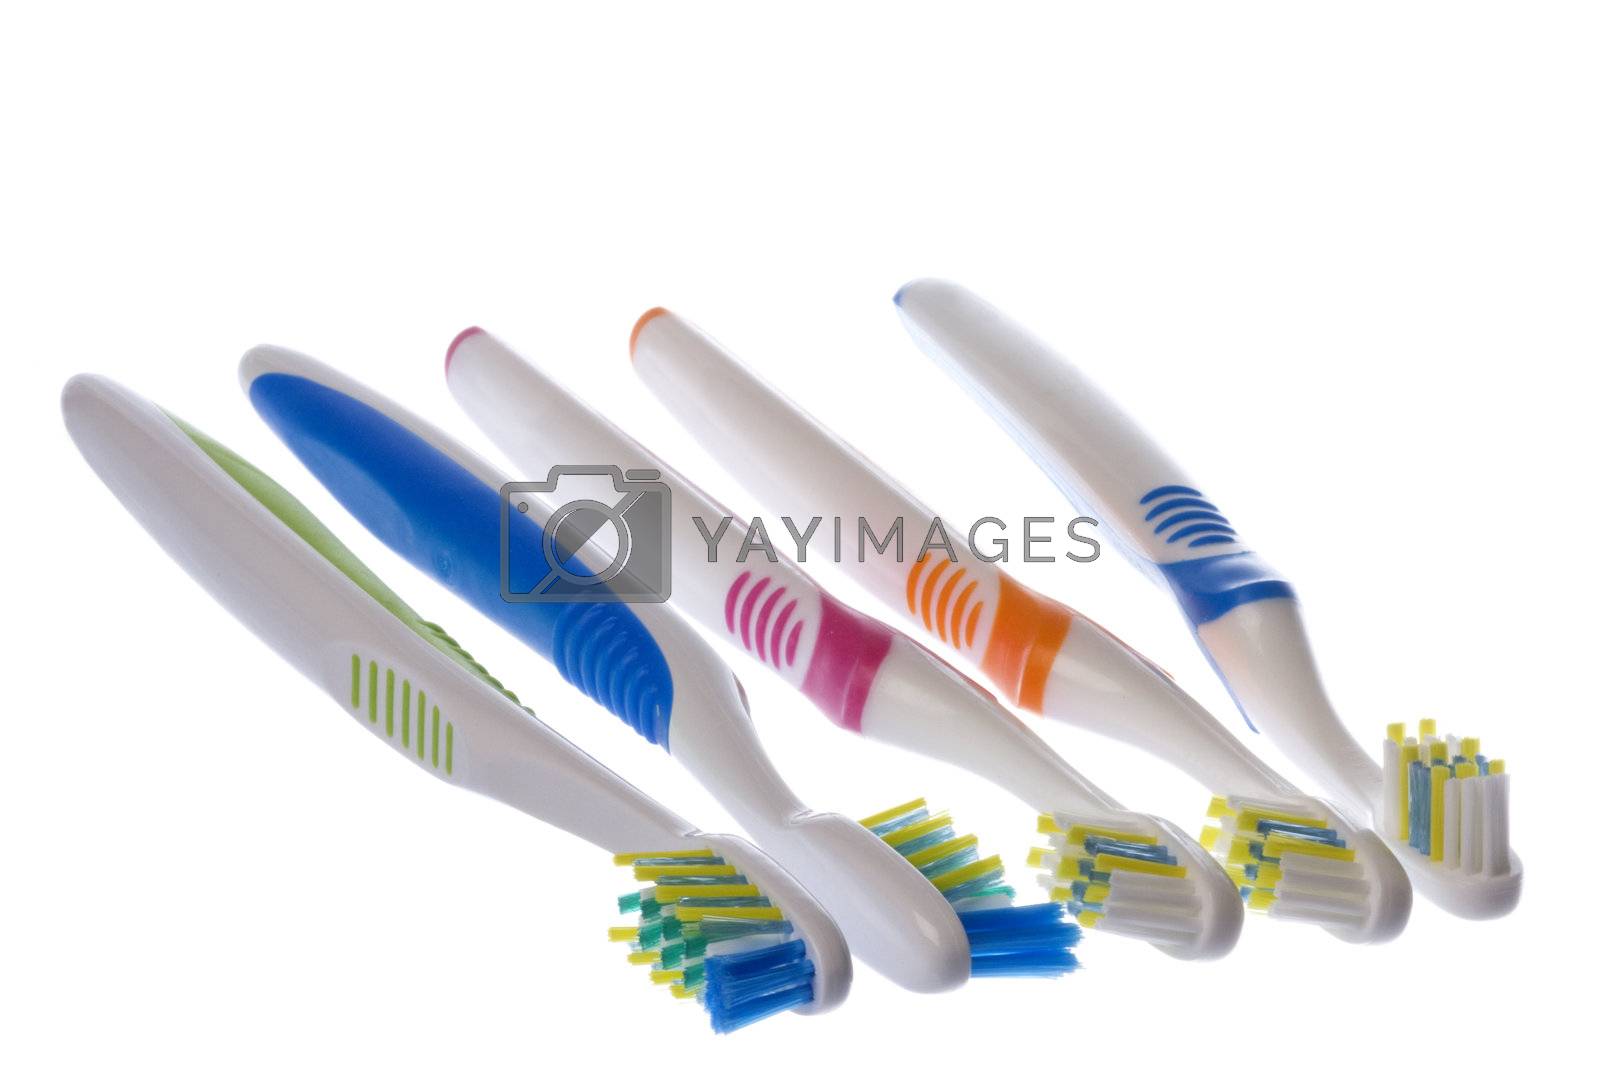 Royalty free image of Toothbrushes Macro Isolated by shariffc